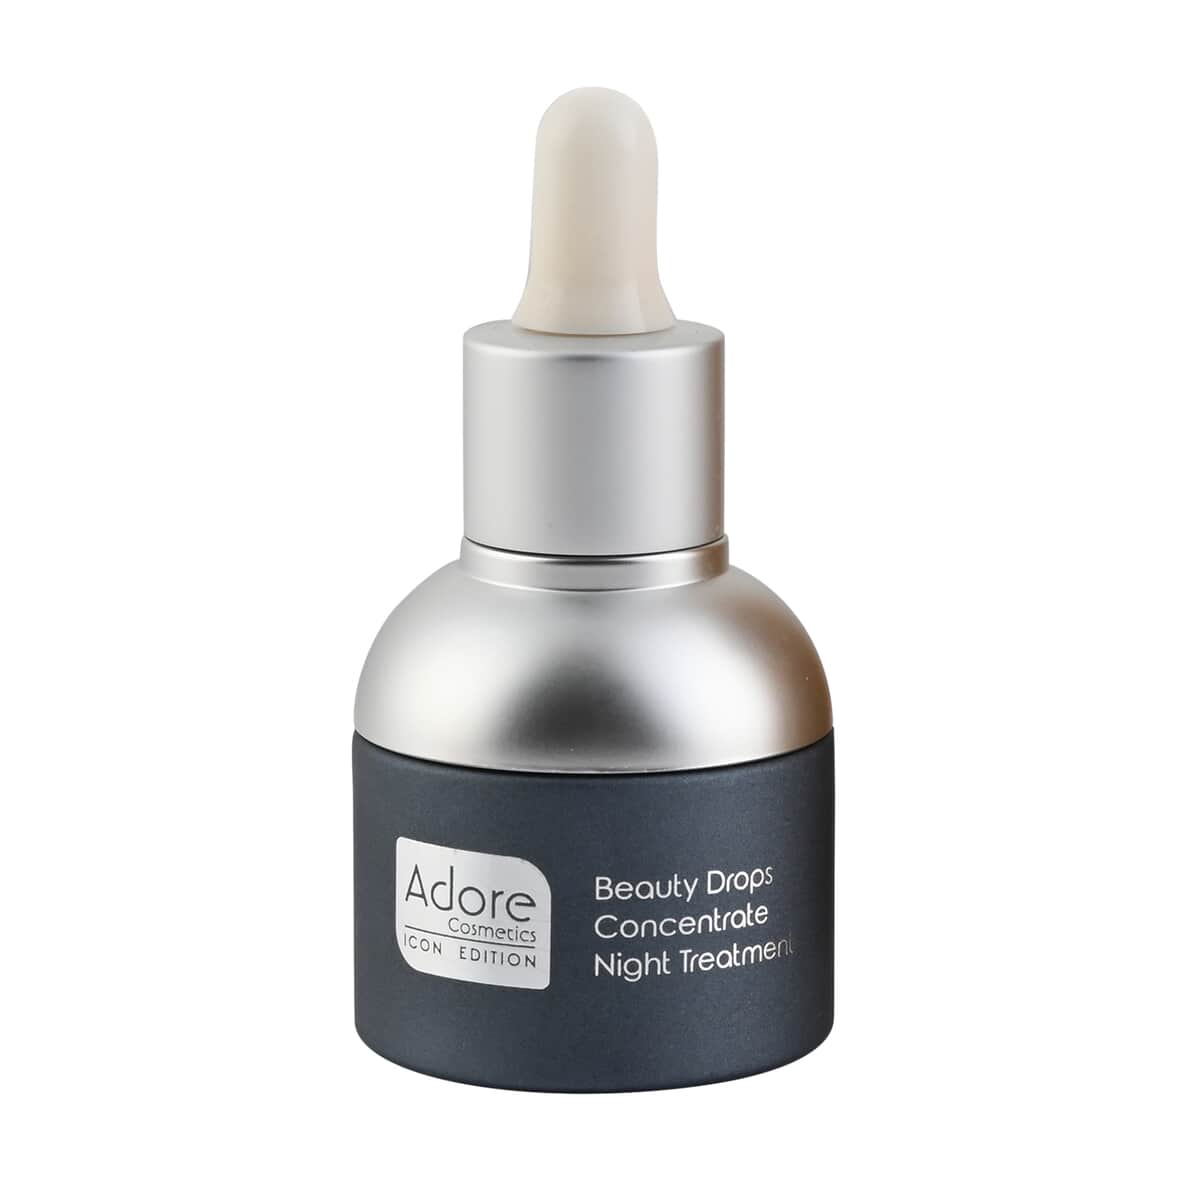 Adore Beauty Drops - Concentrate Night Treatment 30ml/1oz image number 0